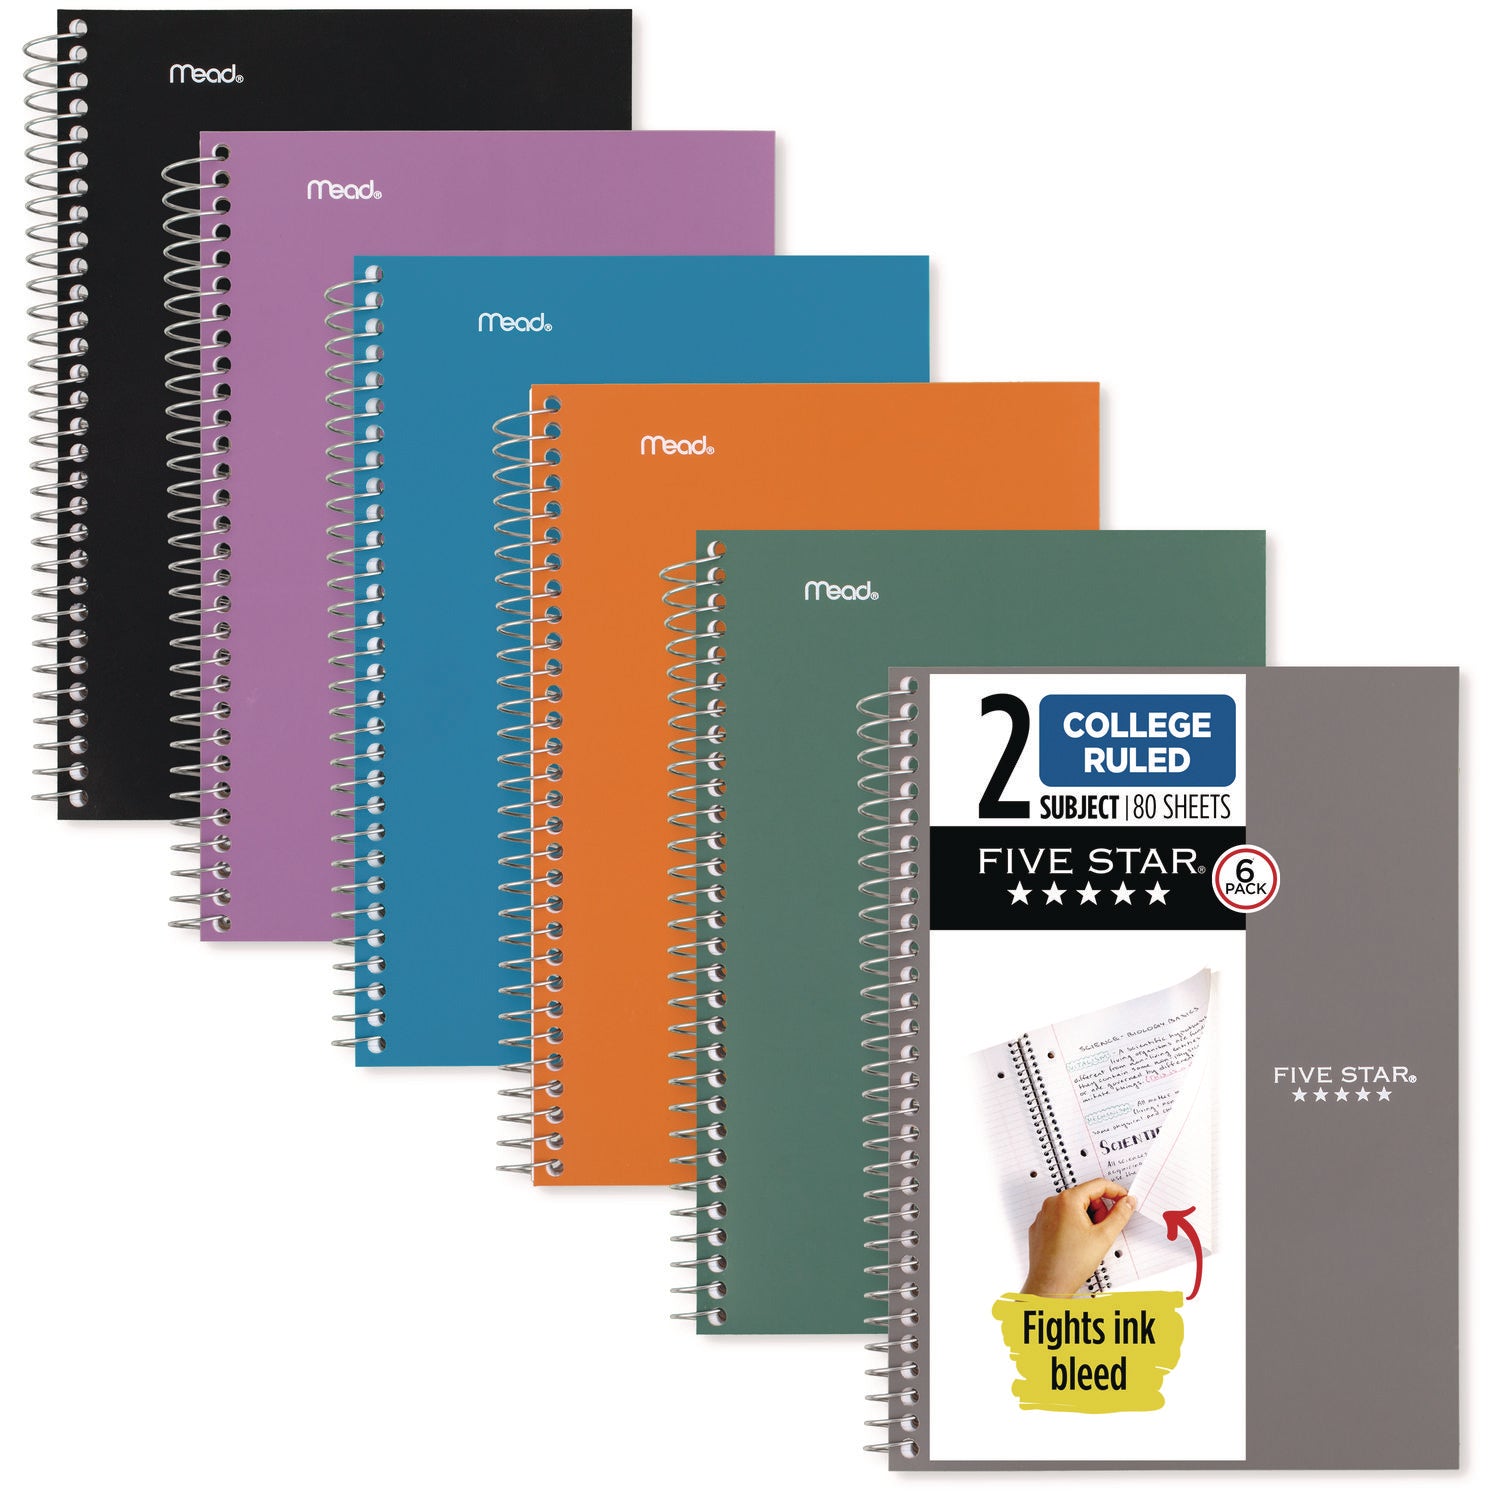 Mead Five Star Wirebound Subject Notebook - 2 Subject(s) - 100 Sheets - Spiral Bound - 6" x 9 1/2" - 9" x 7" x 2" - Assorted Cover - Durable Cover, Bleed Resistant, Perforated, Spiral Lock, Pocket Divider, Durable Cover, Smooth - 6 / Pack - 1